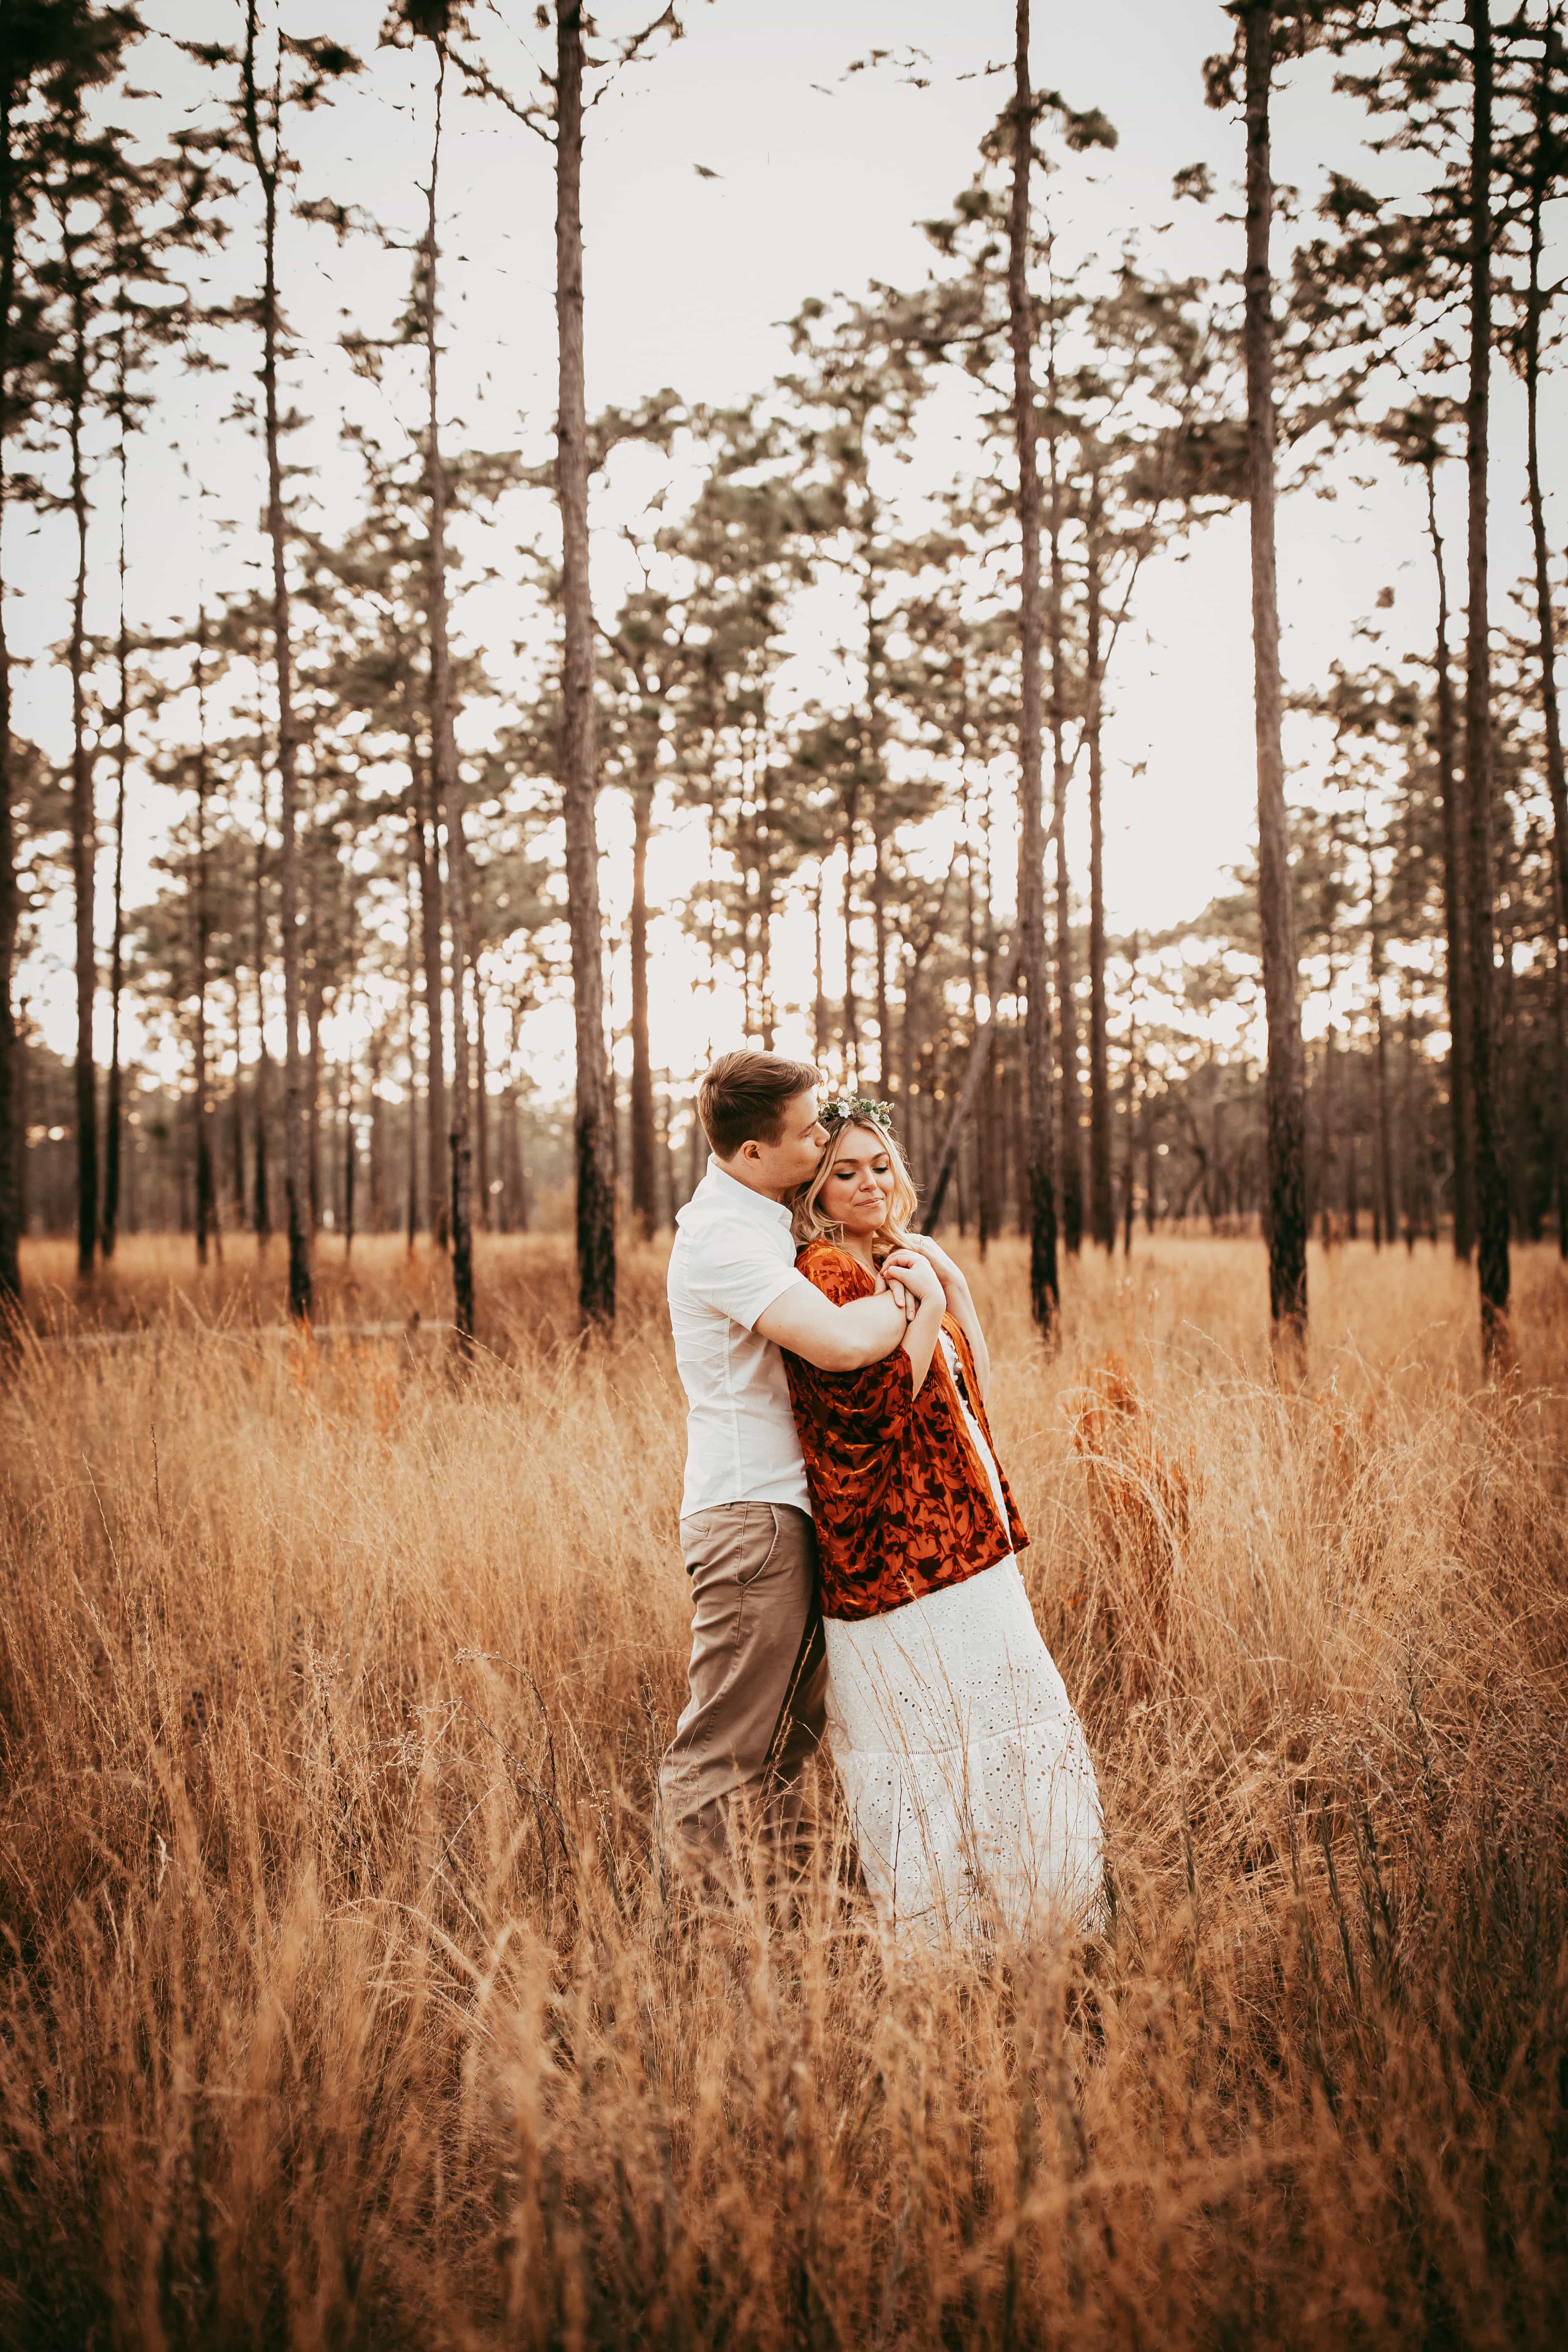 Orlando Couples Photography, couple cuddled up together in a field